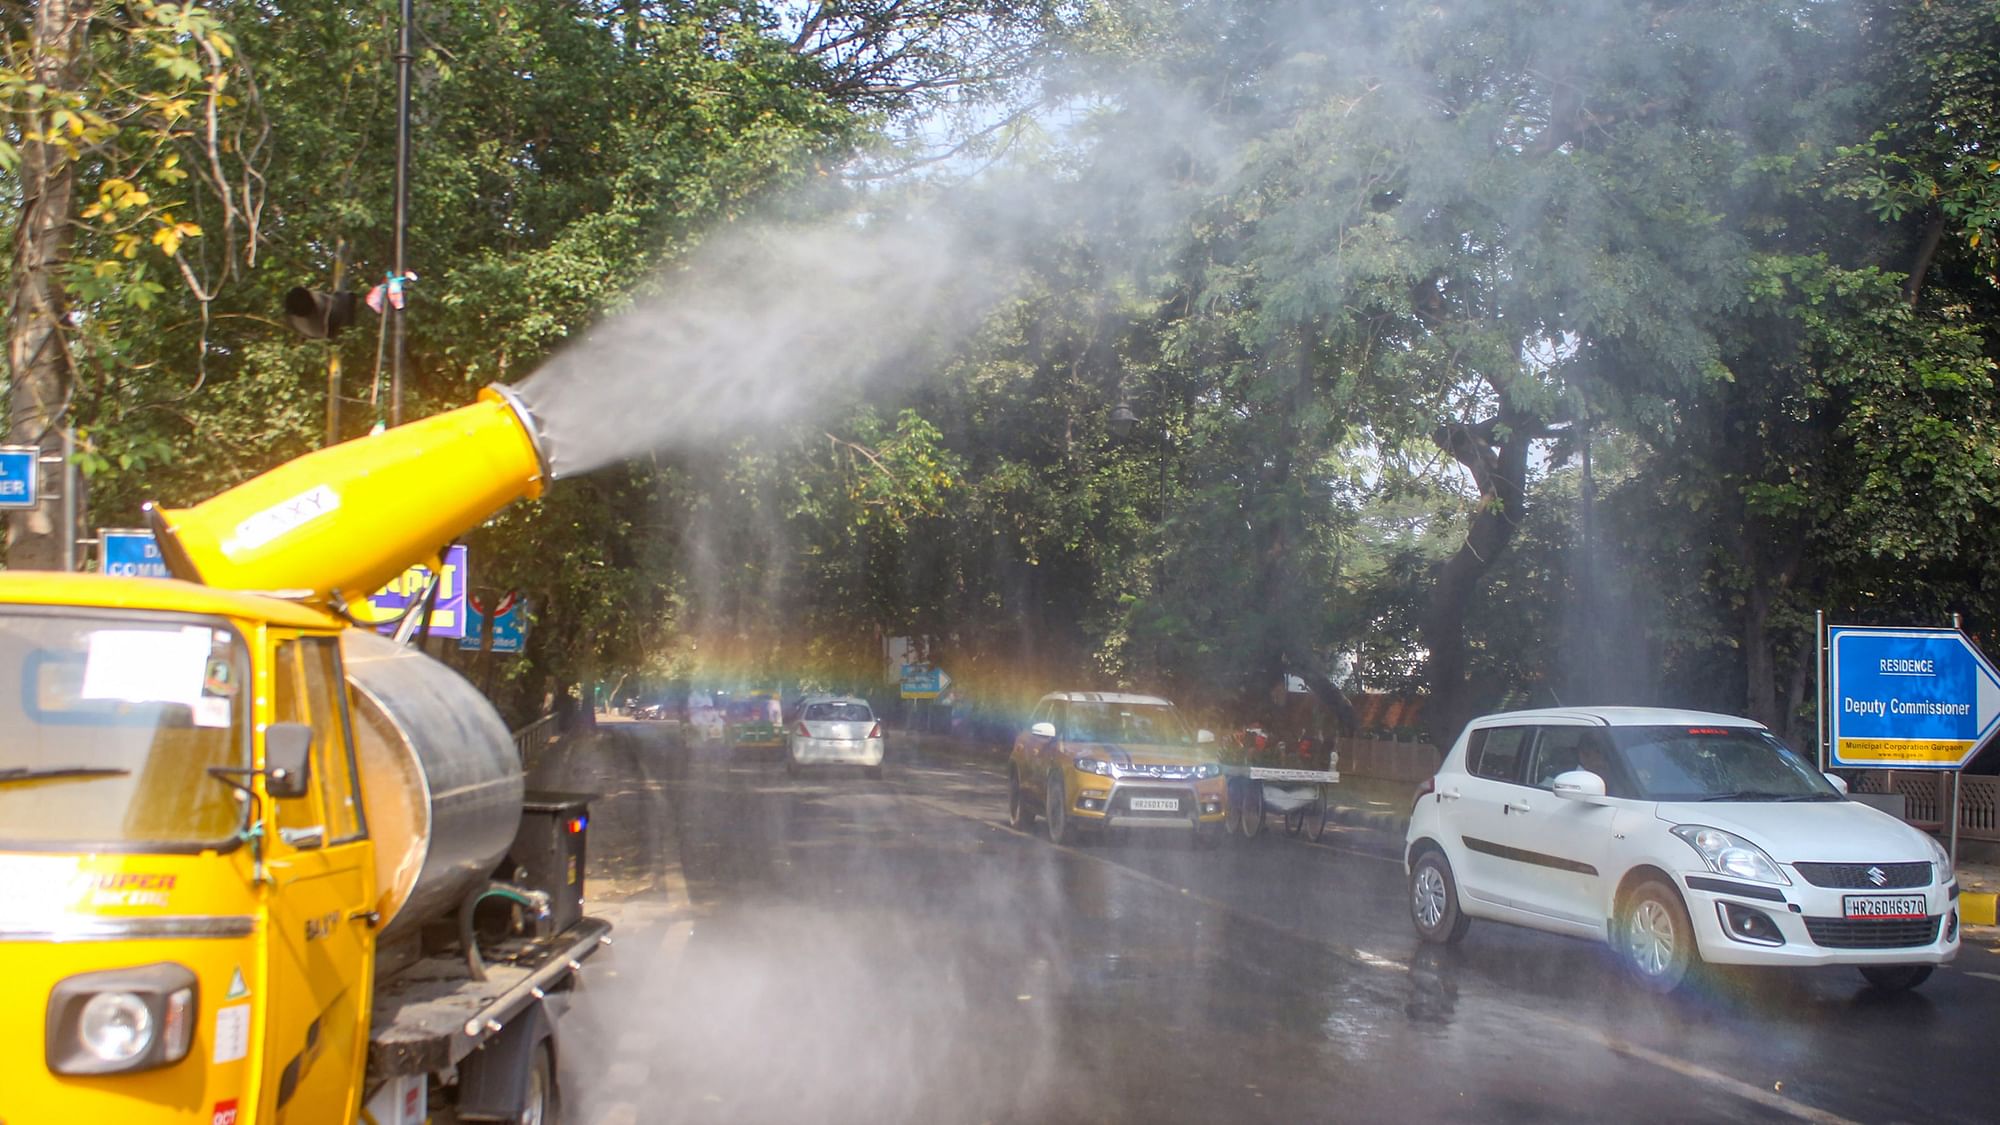 <div class="paragraphs"><p>An anti-smog gun sprays water droplets to curb air pollution, in Gurugram. Image used for representation.</p></div>